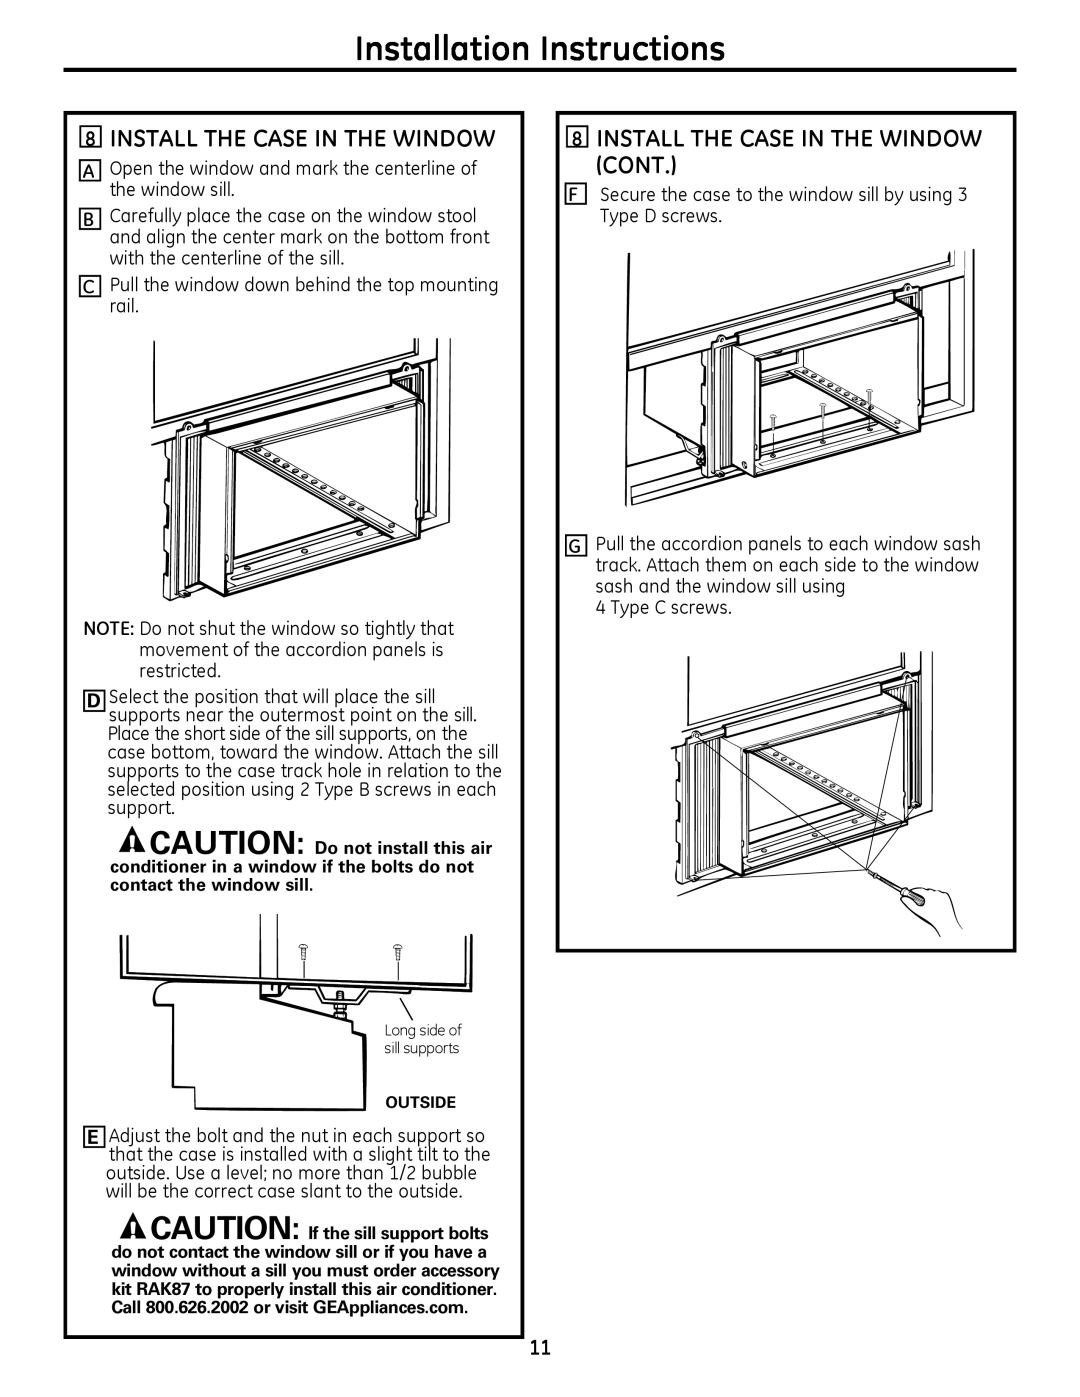 GE 880 installation instructions Install The Case In The Window Cont, Installation Instructions 